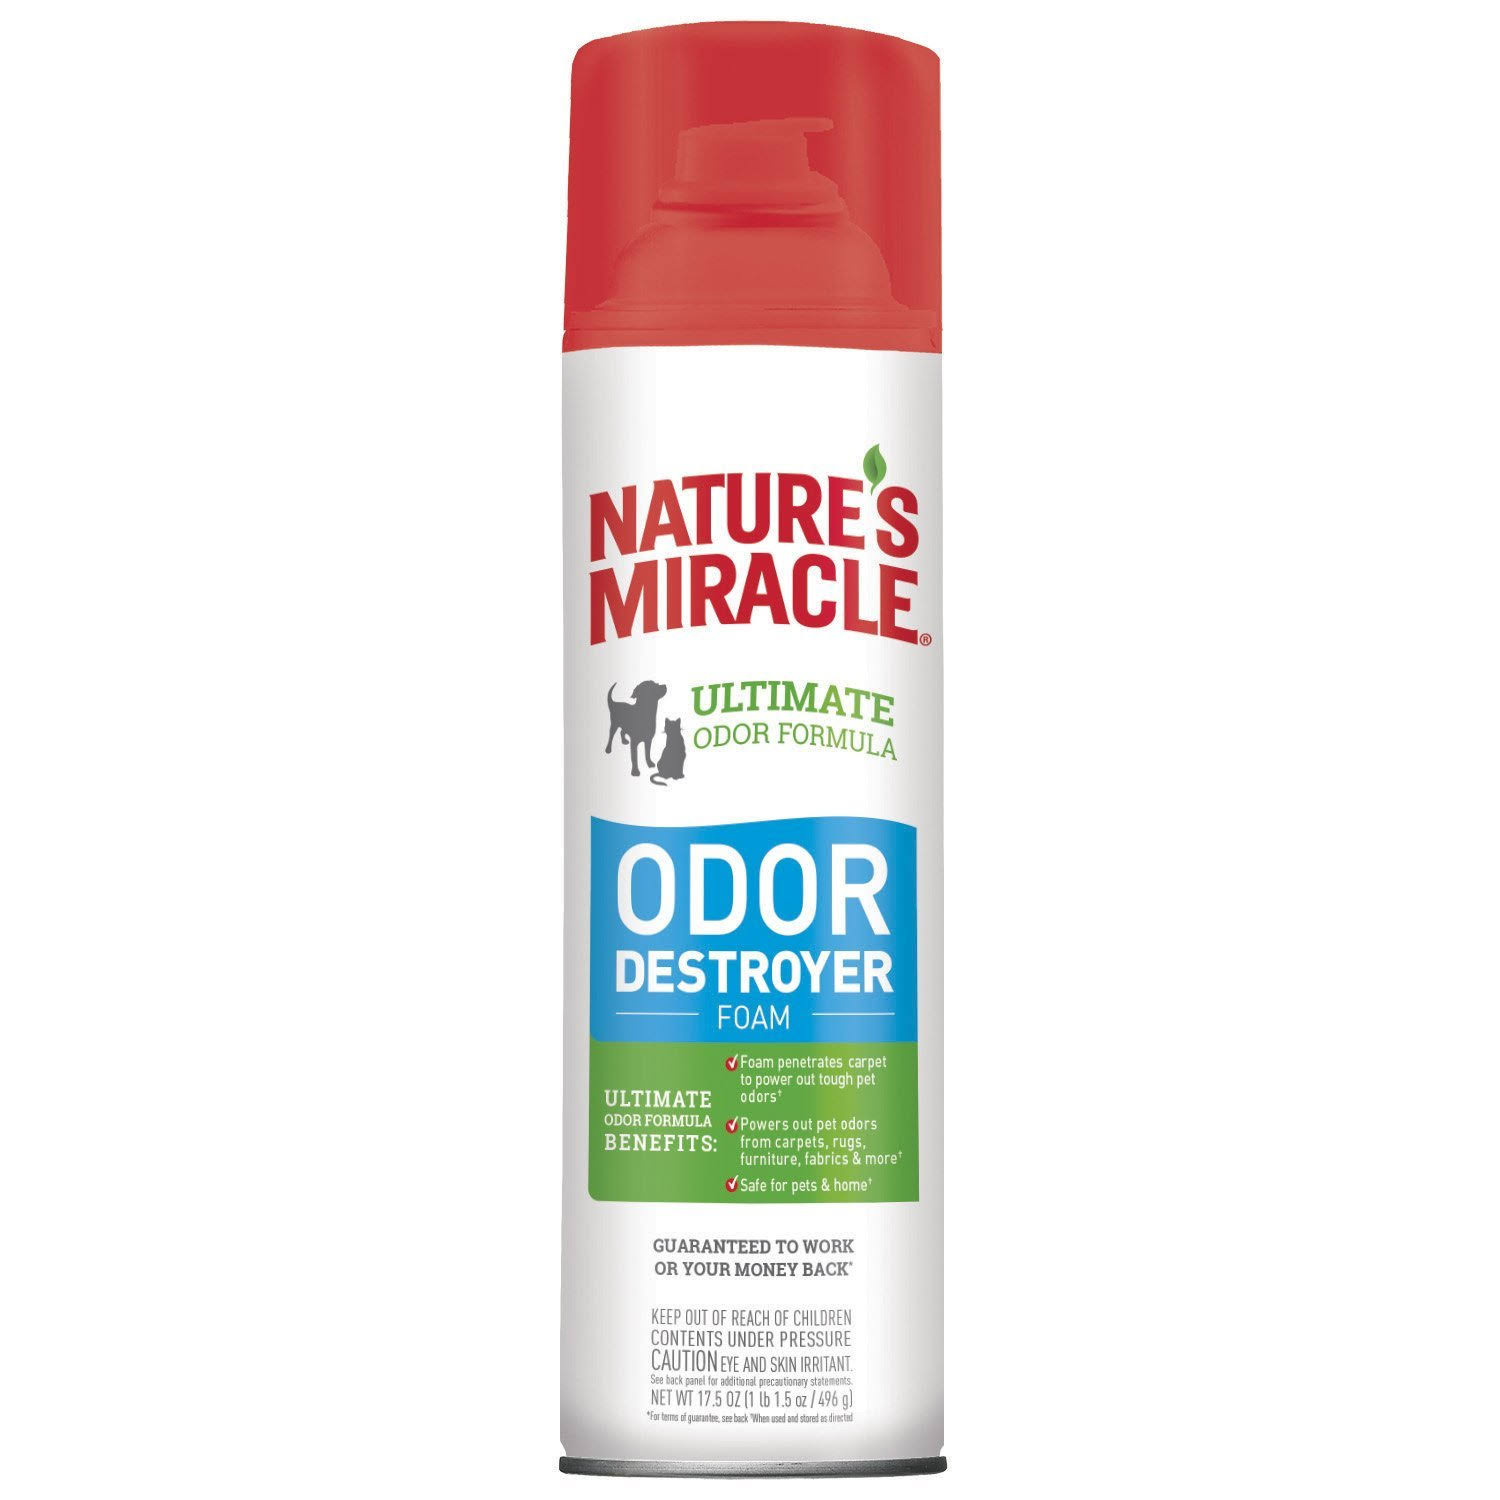 Nature's Miracle - Odor Destroyer Foam, 17.5oz